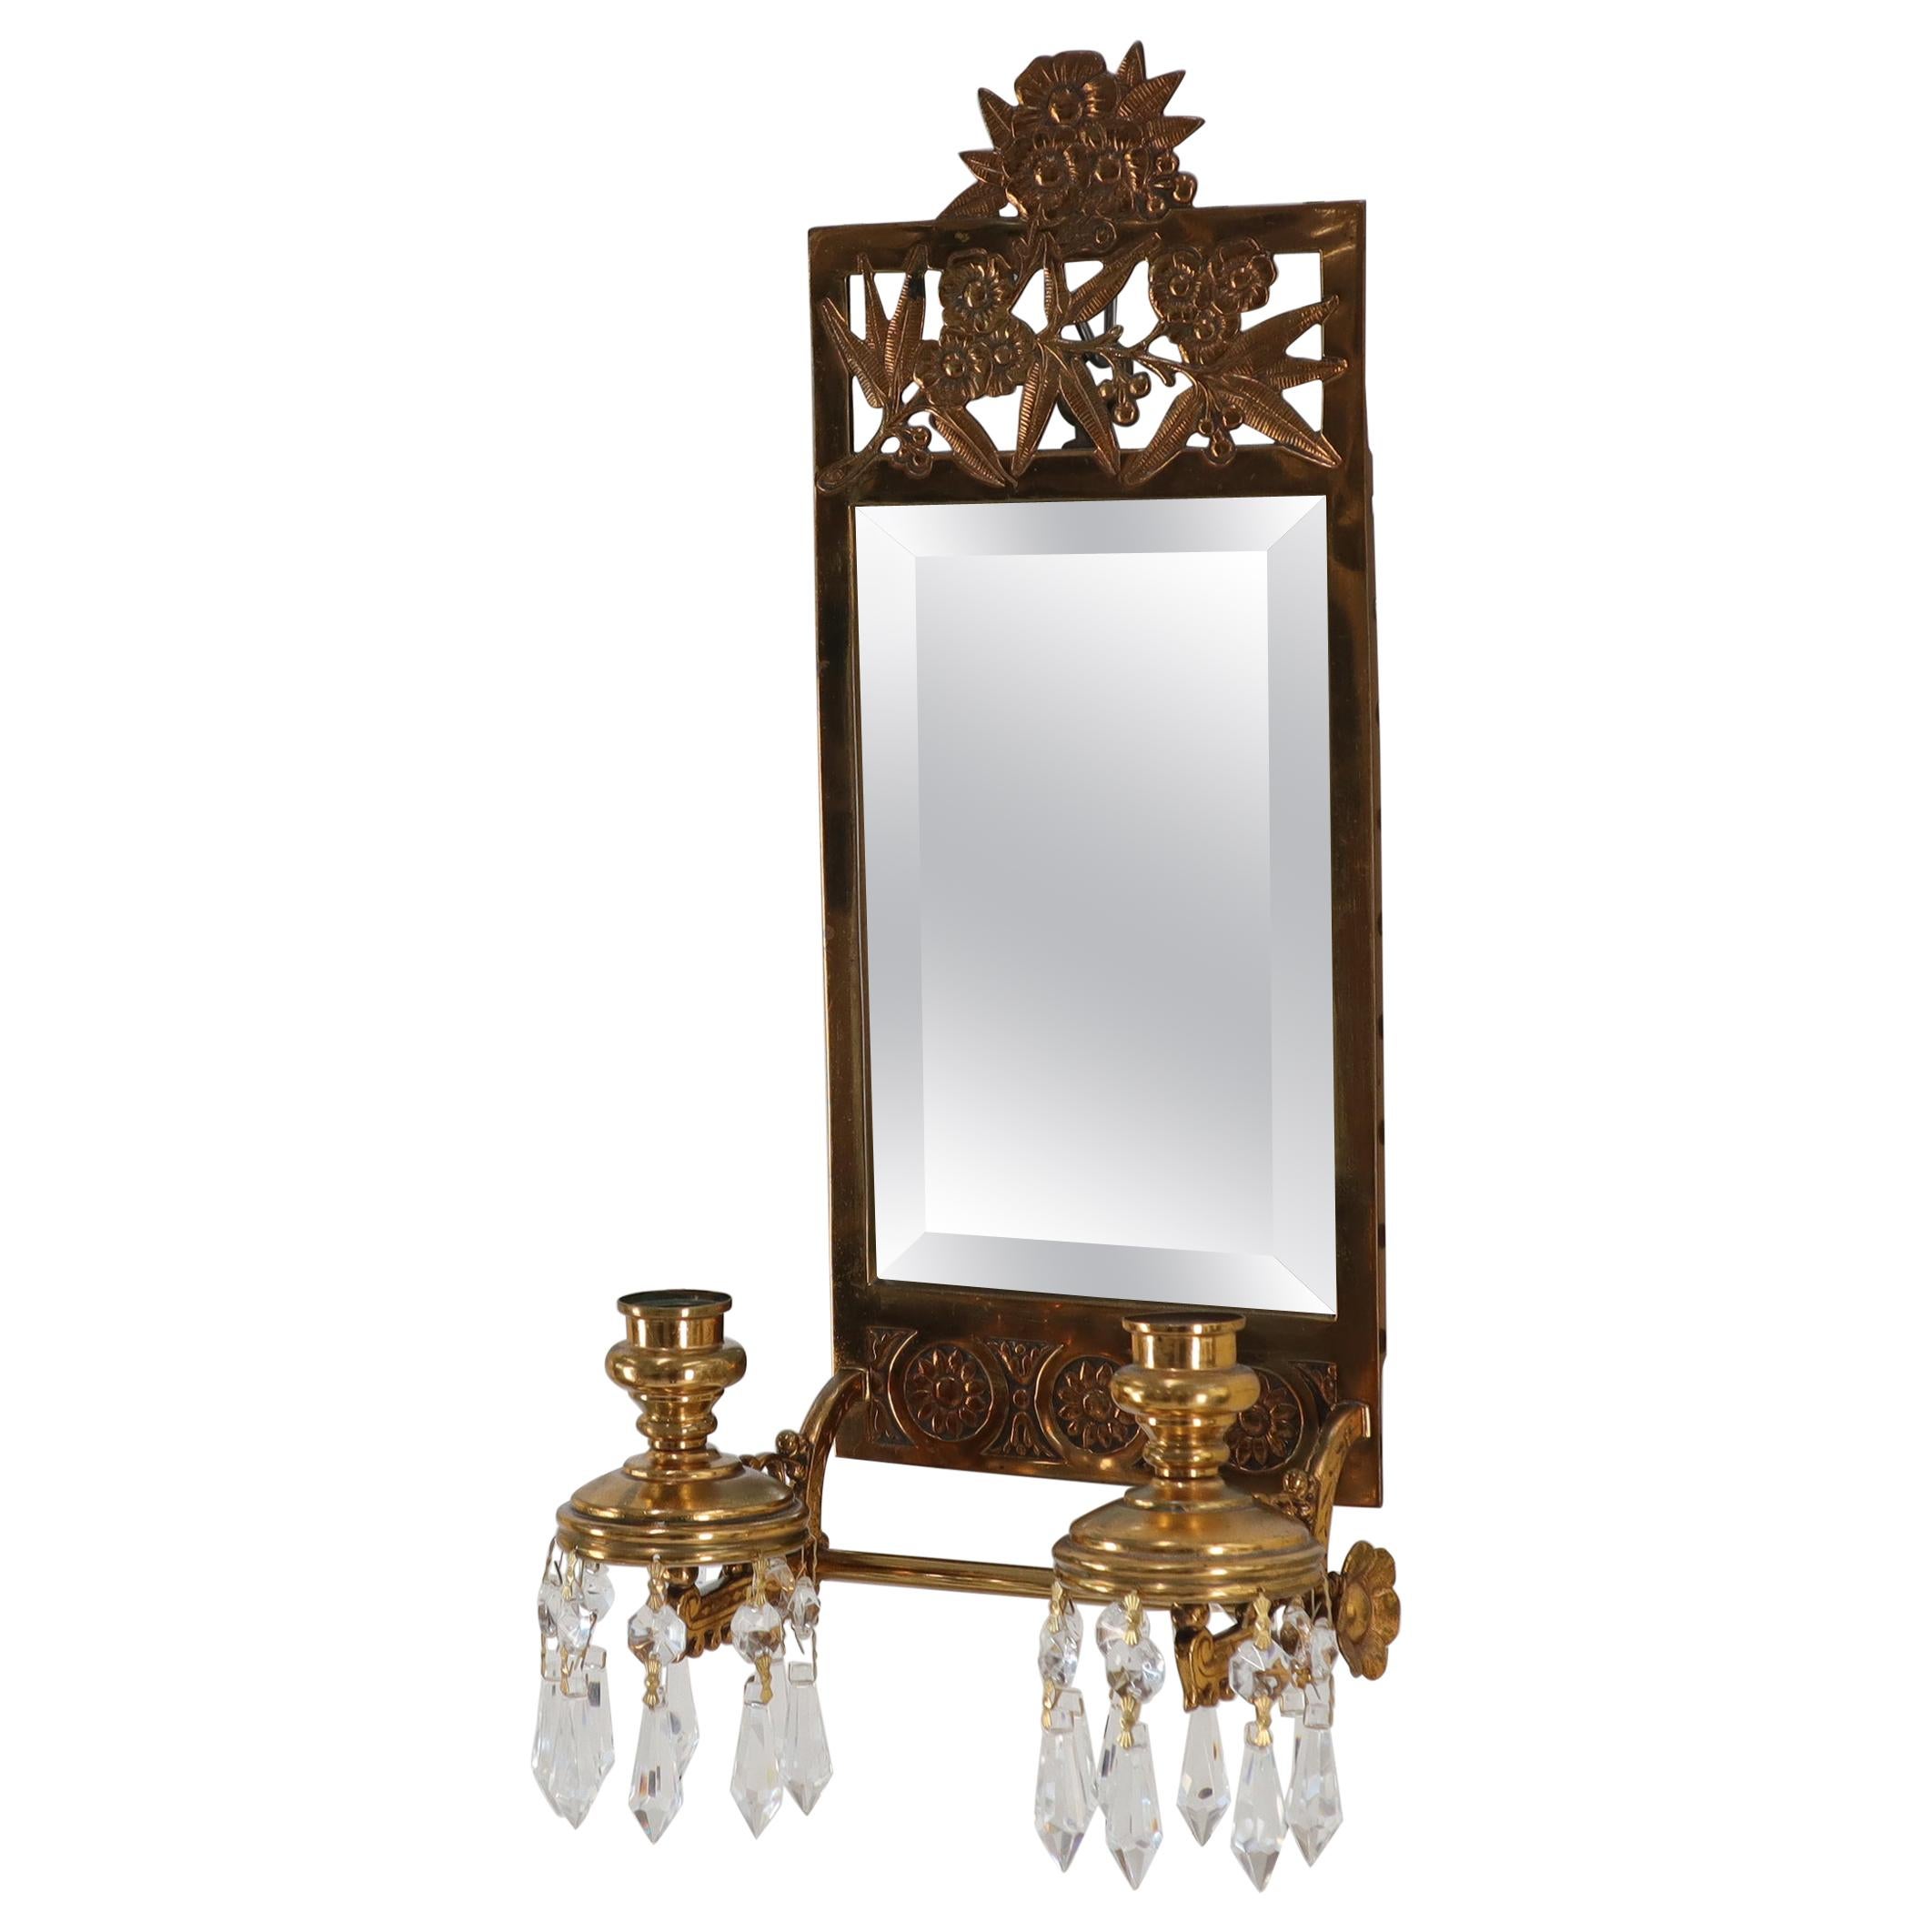 Antique Brass 2 Candle Mirror Wall, Mirrored Wall Sconces For Candles Uk